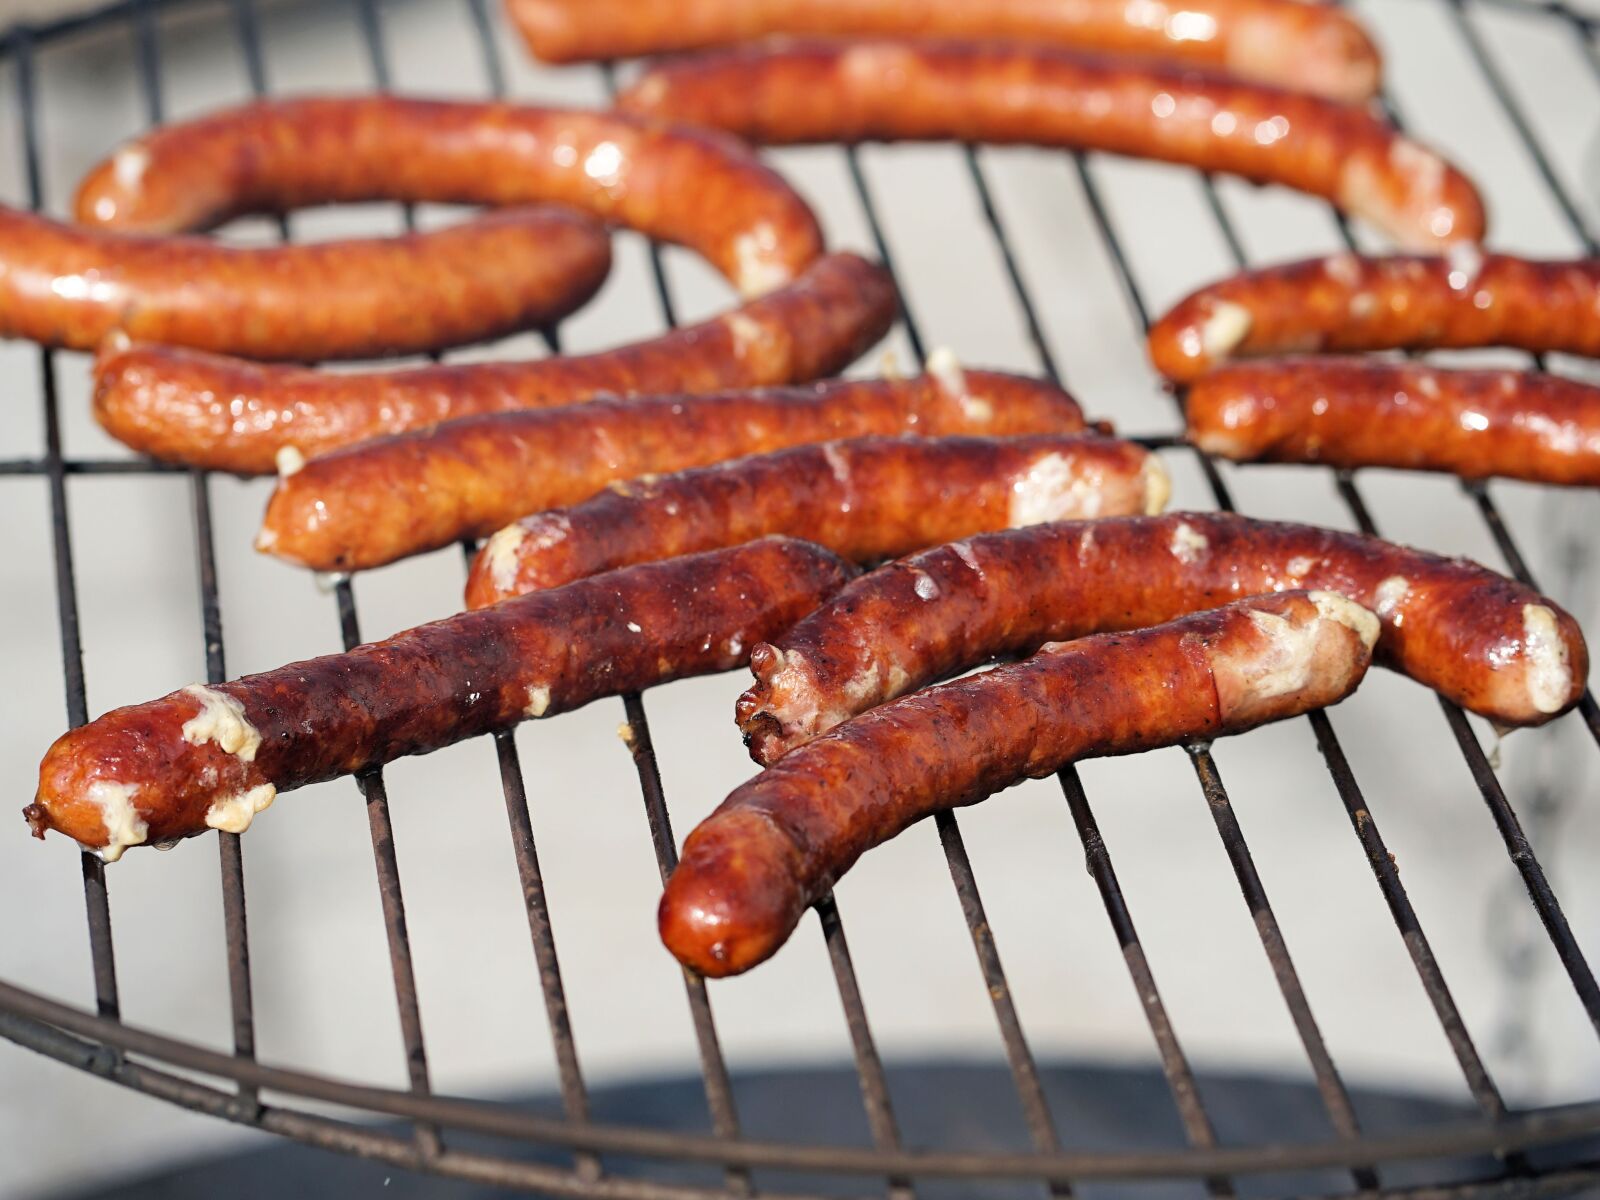 Sony a7 II sample photo. Grill, sausage, barbecue photography